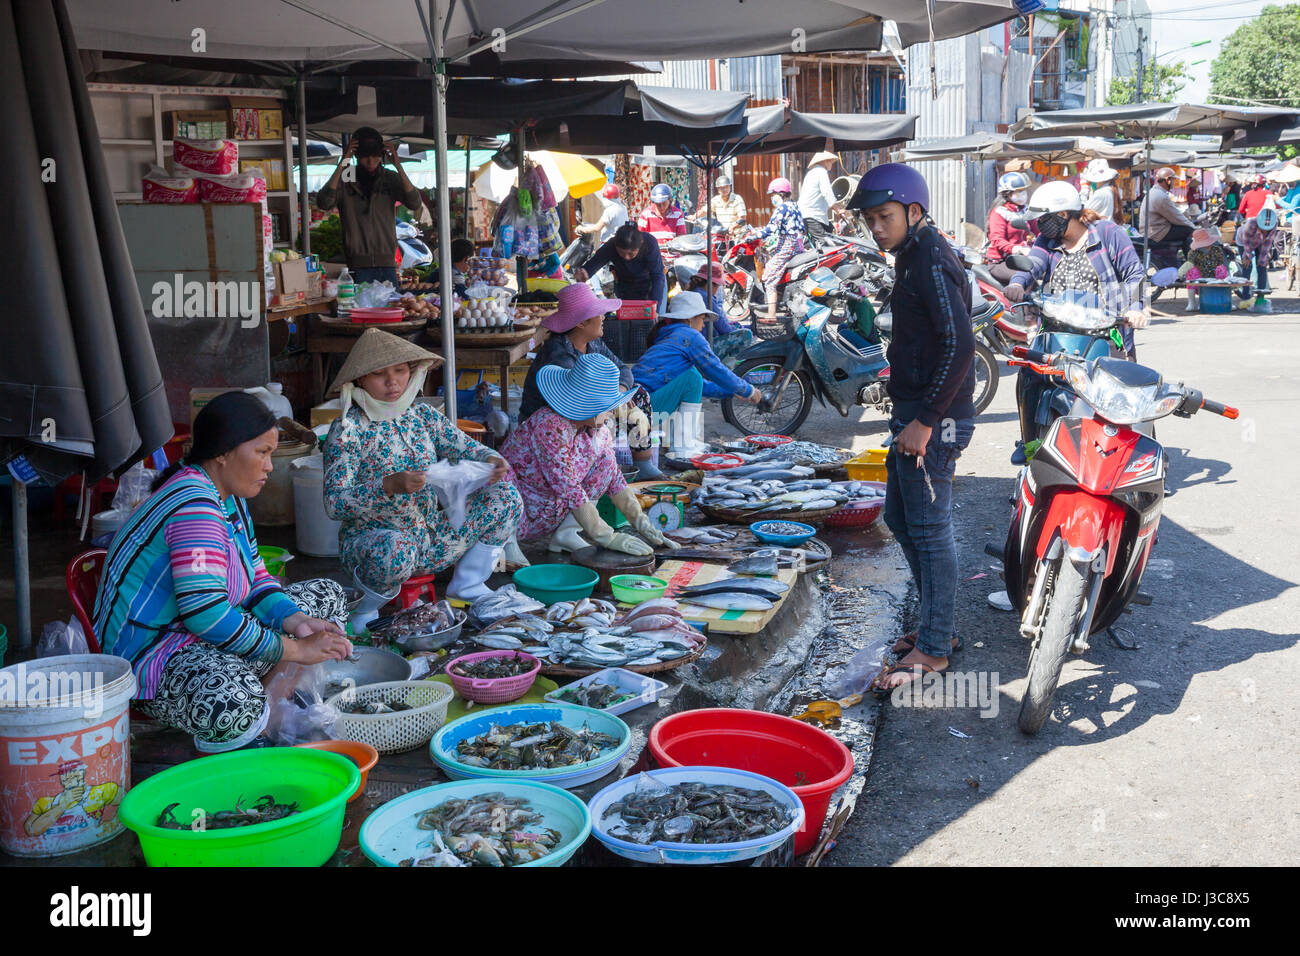 NHA TRANG, VIETNAM - DECEMBER 12: Women are selling seafood at the wet market on December 12, 2015 in Nha Trang, Vietnam. Stock Photo